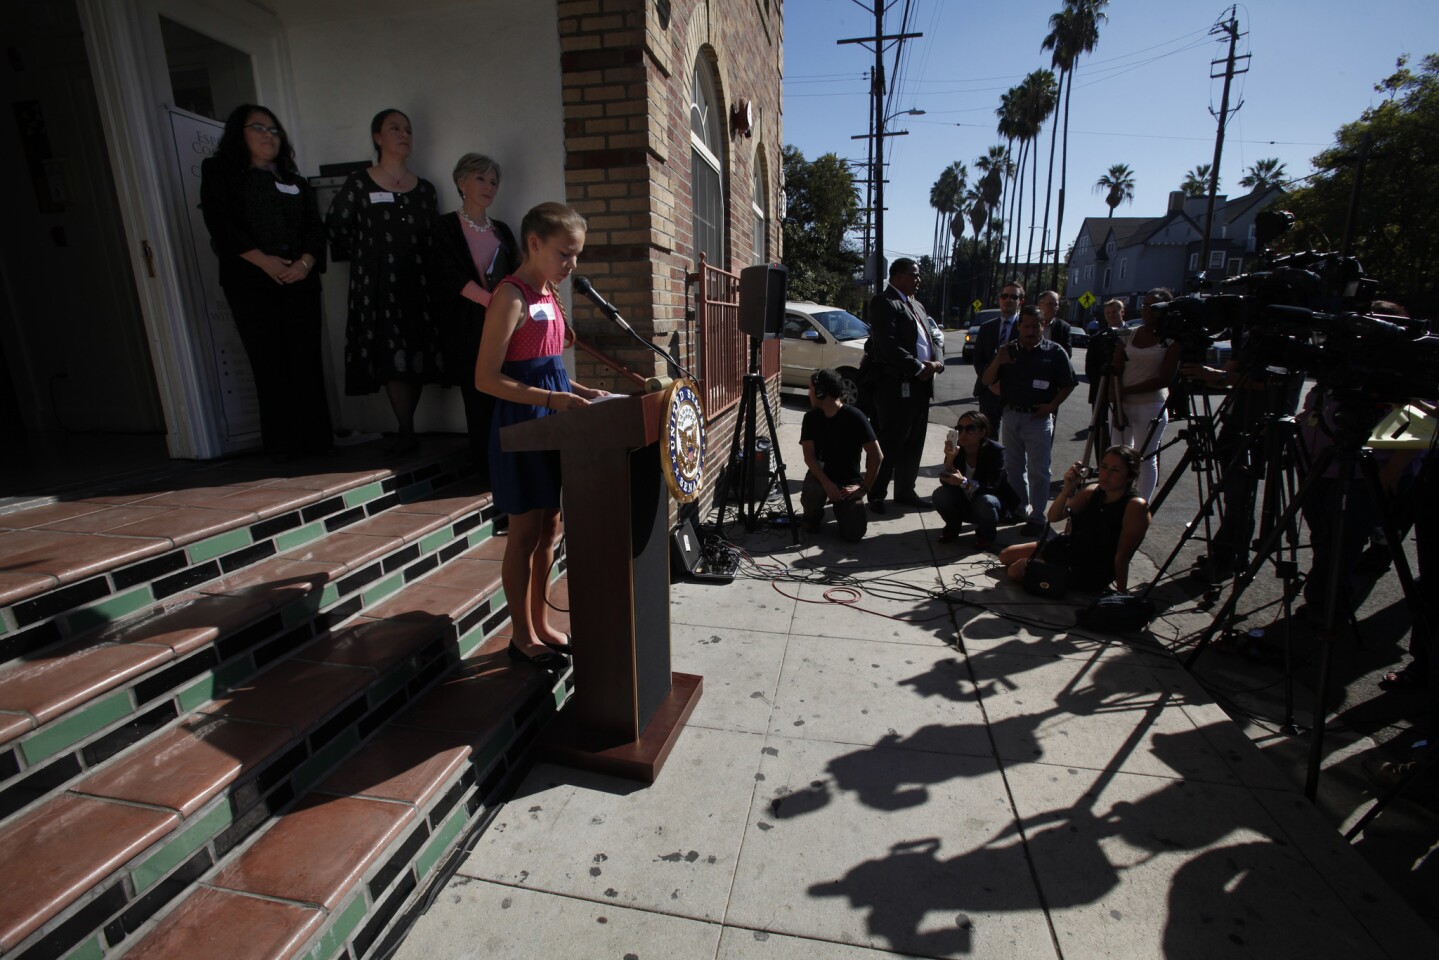 Nalleli Cobo, 13, speaks to the news media during a press conference in her University Park neighborhood in Los Angeles. Nalleli narrated a video produced by local activists asking that the Allenco oil field not resume operations.